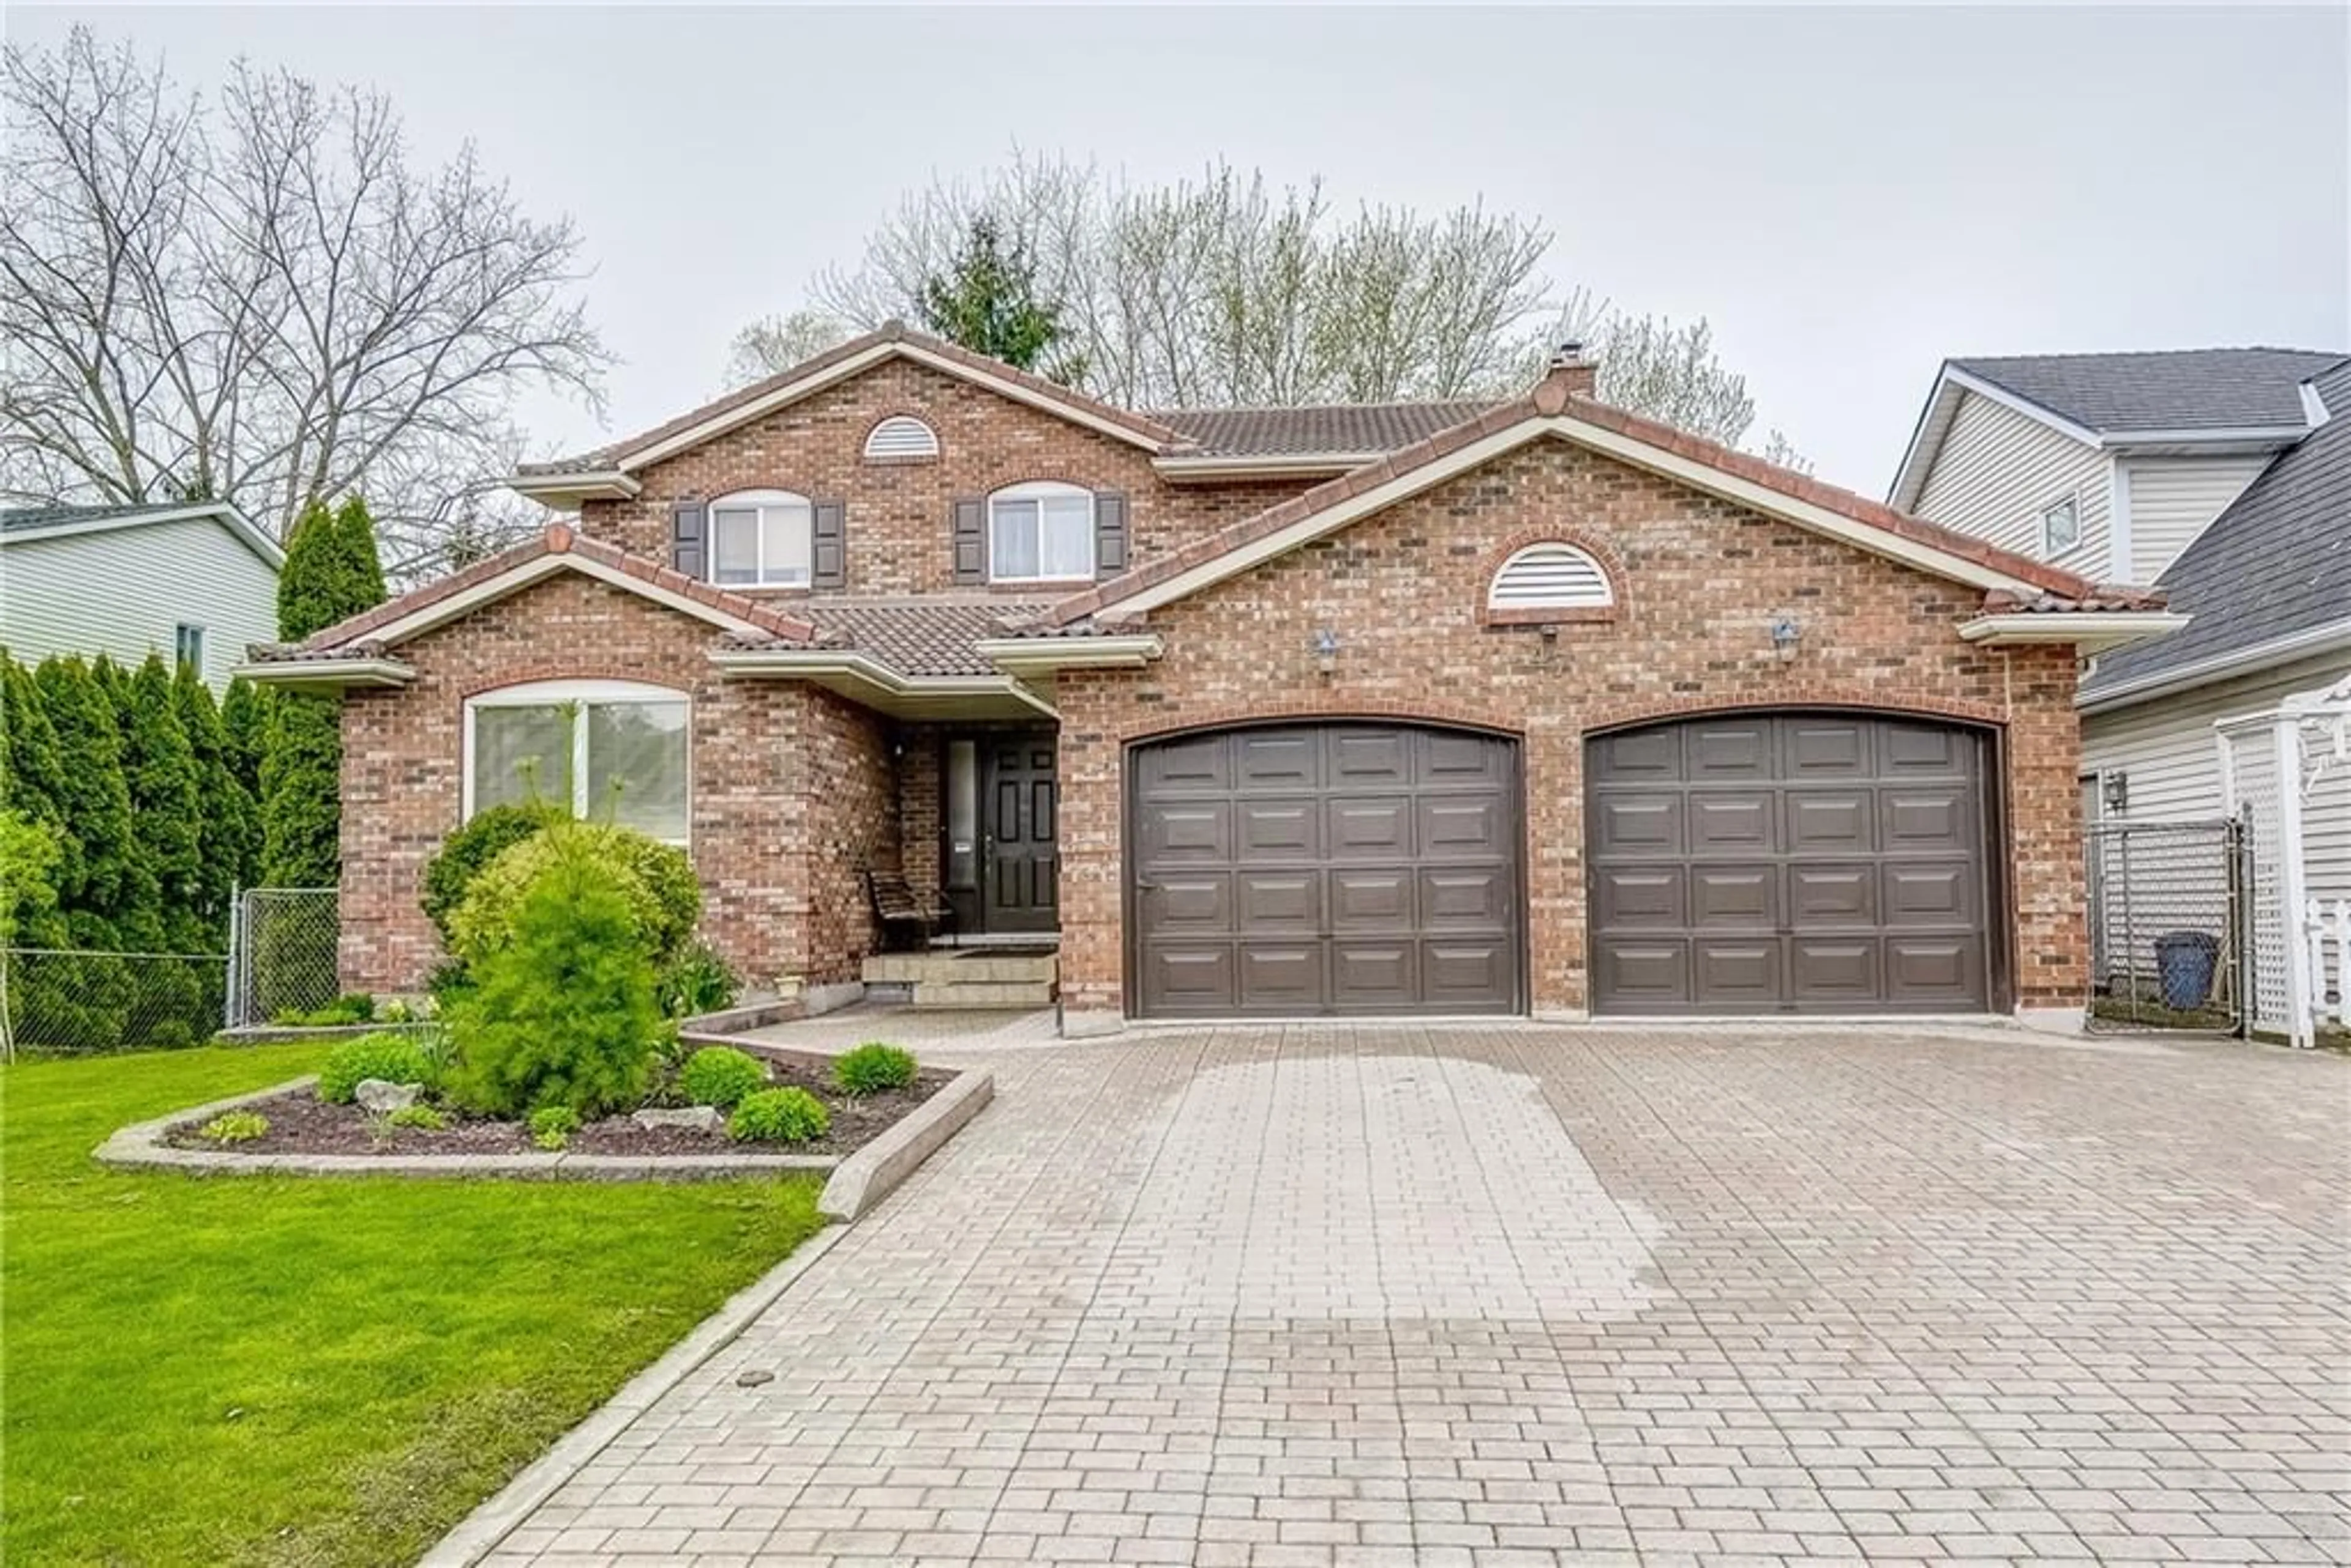 Home with brick exterior material for 47 CHANCERY Cir, St. Catharines Ontario L2M 7R3